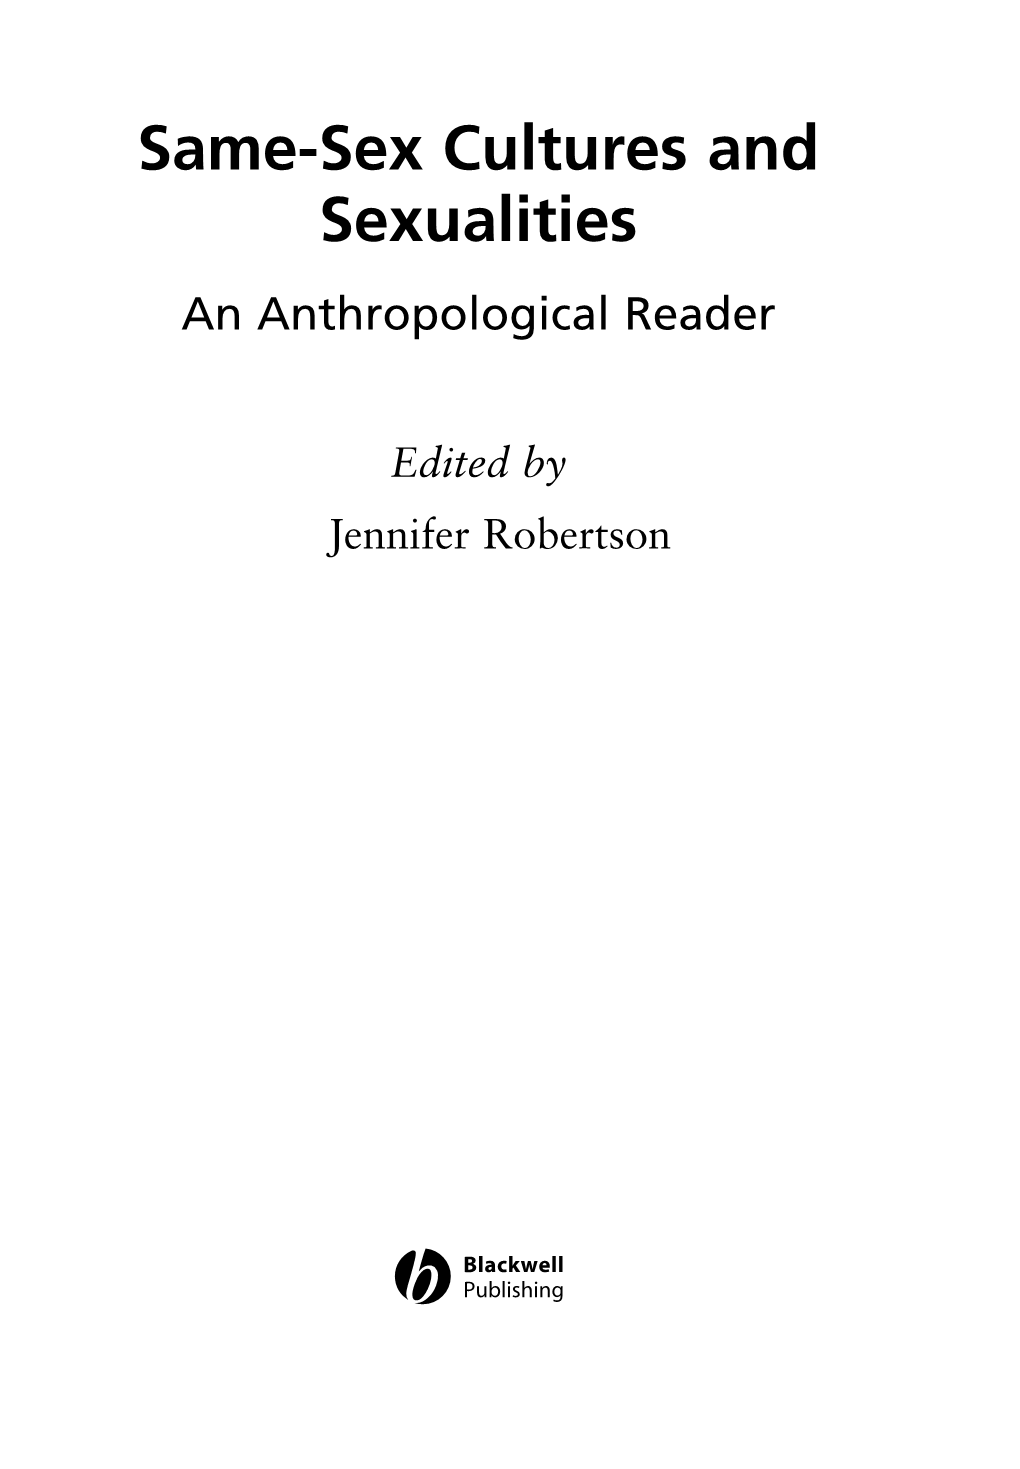 Same-Sex Cultures and Sexualities an Anthropological Reader